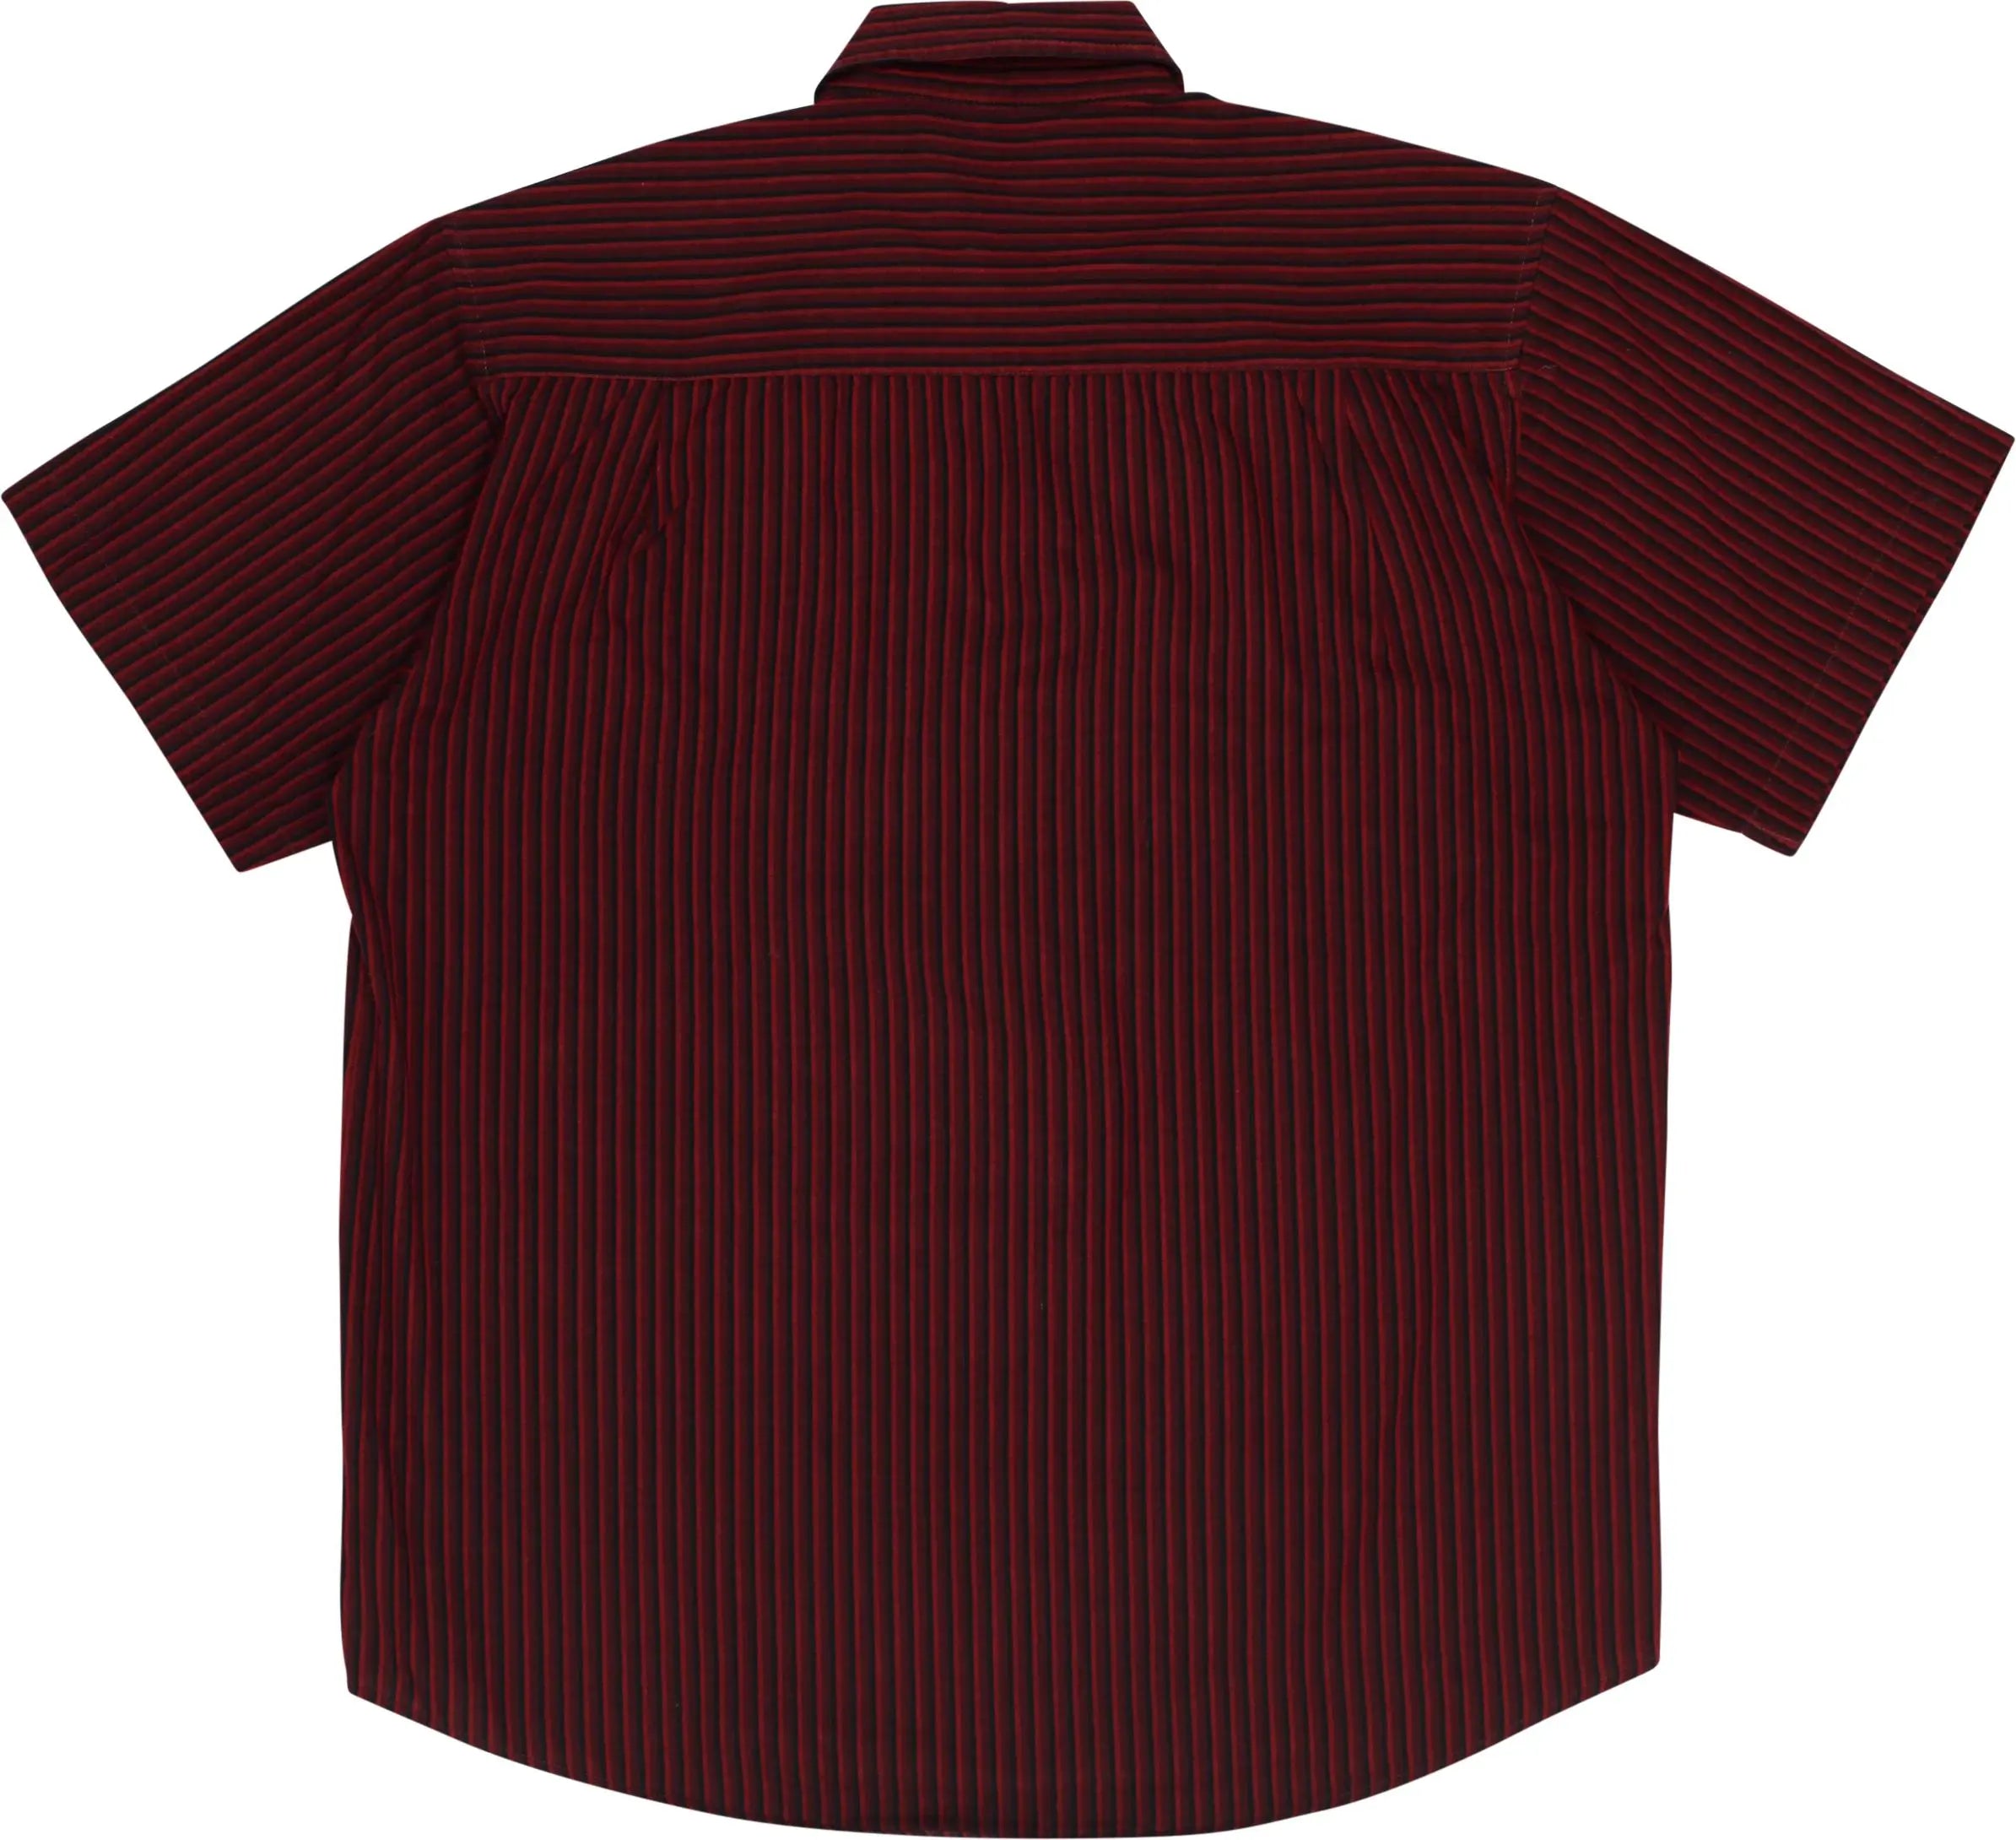 Reward Classic - Red Striped Short Sleeve Shirt- ThriftTale.com - Vintage and second handclothing